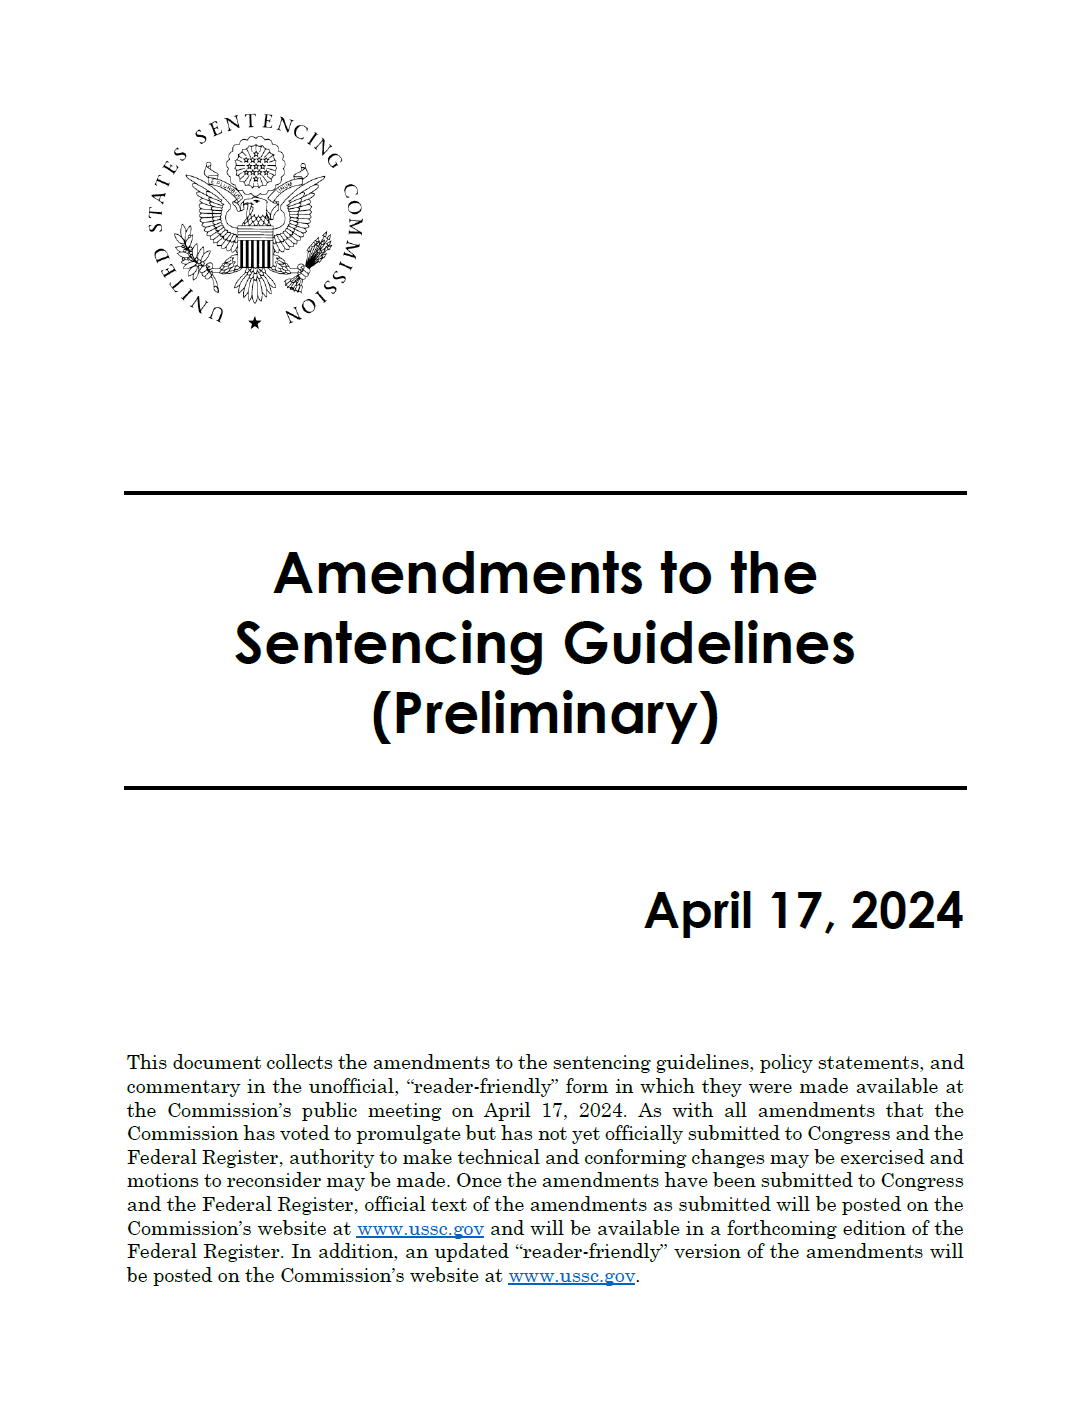 Cover of the preliminary amendment package.